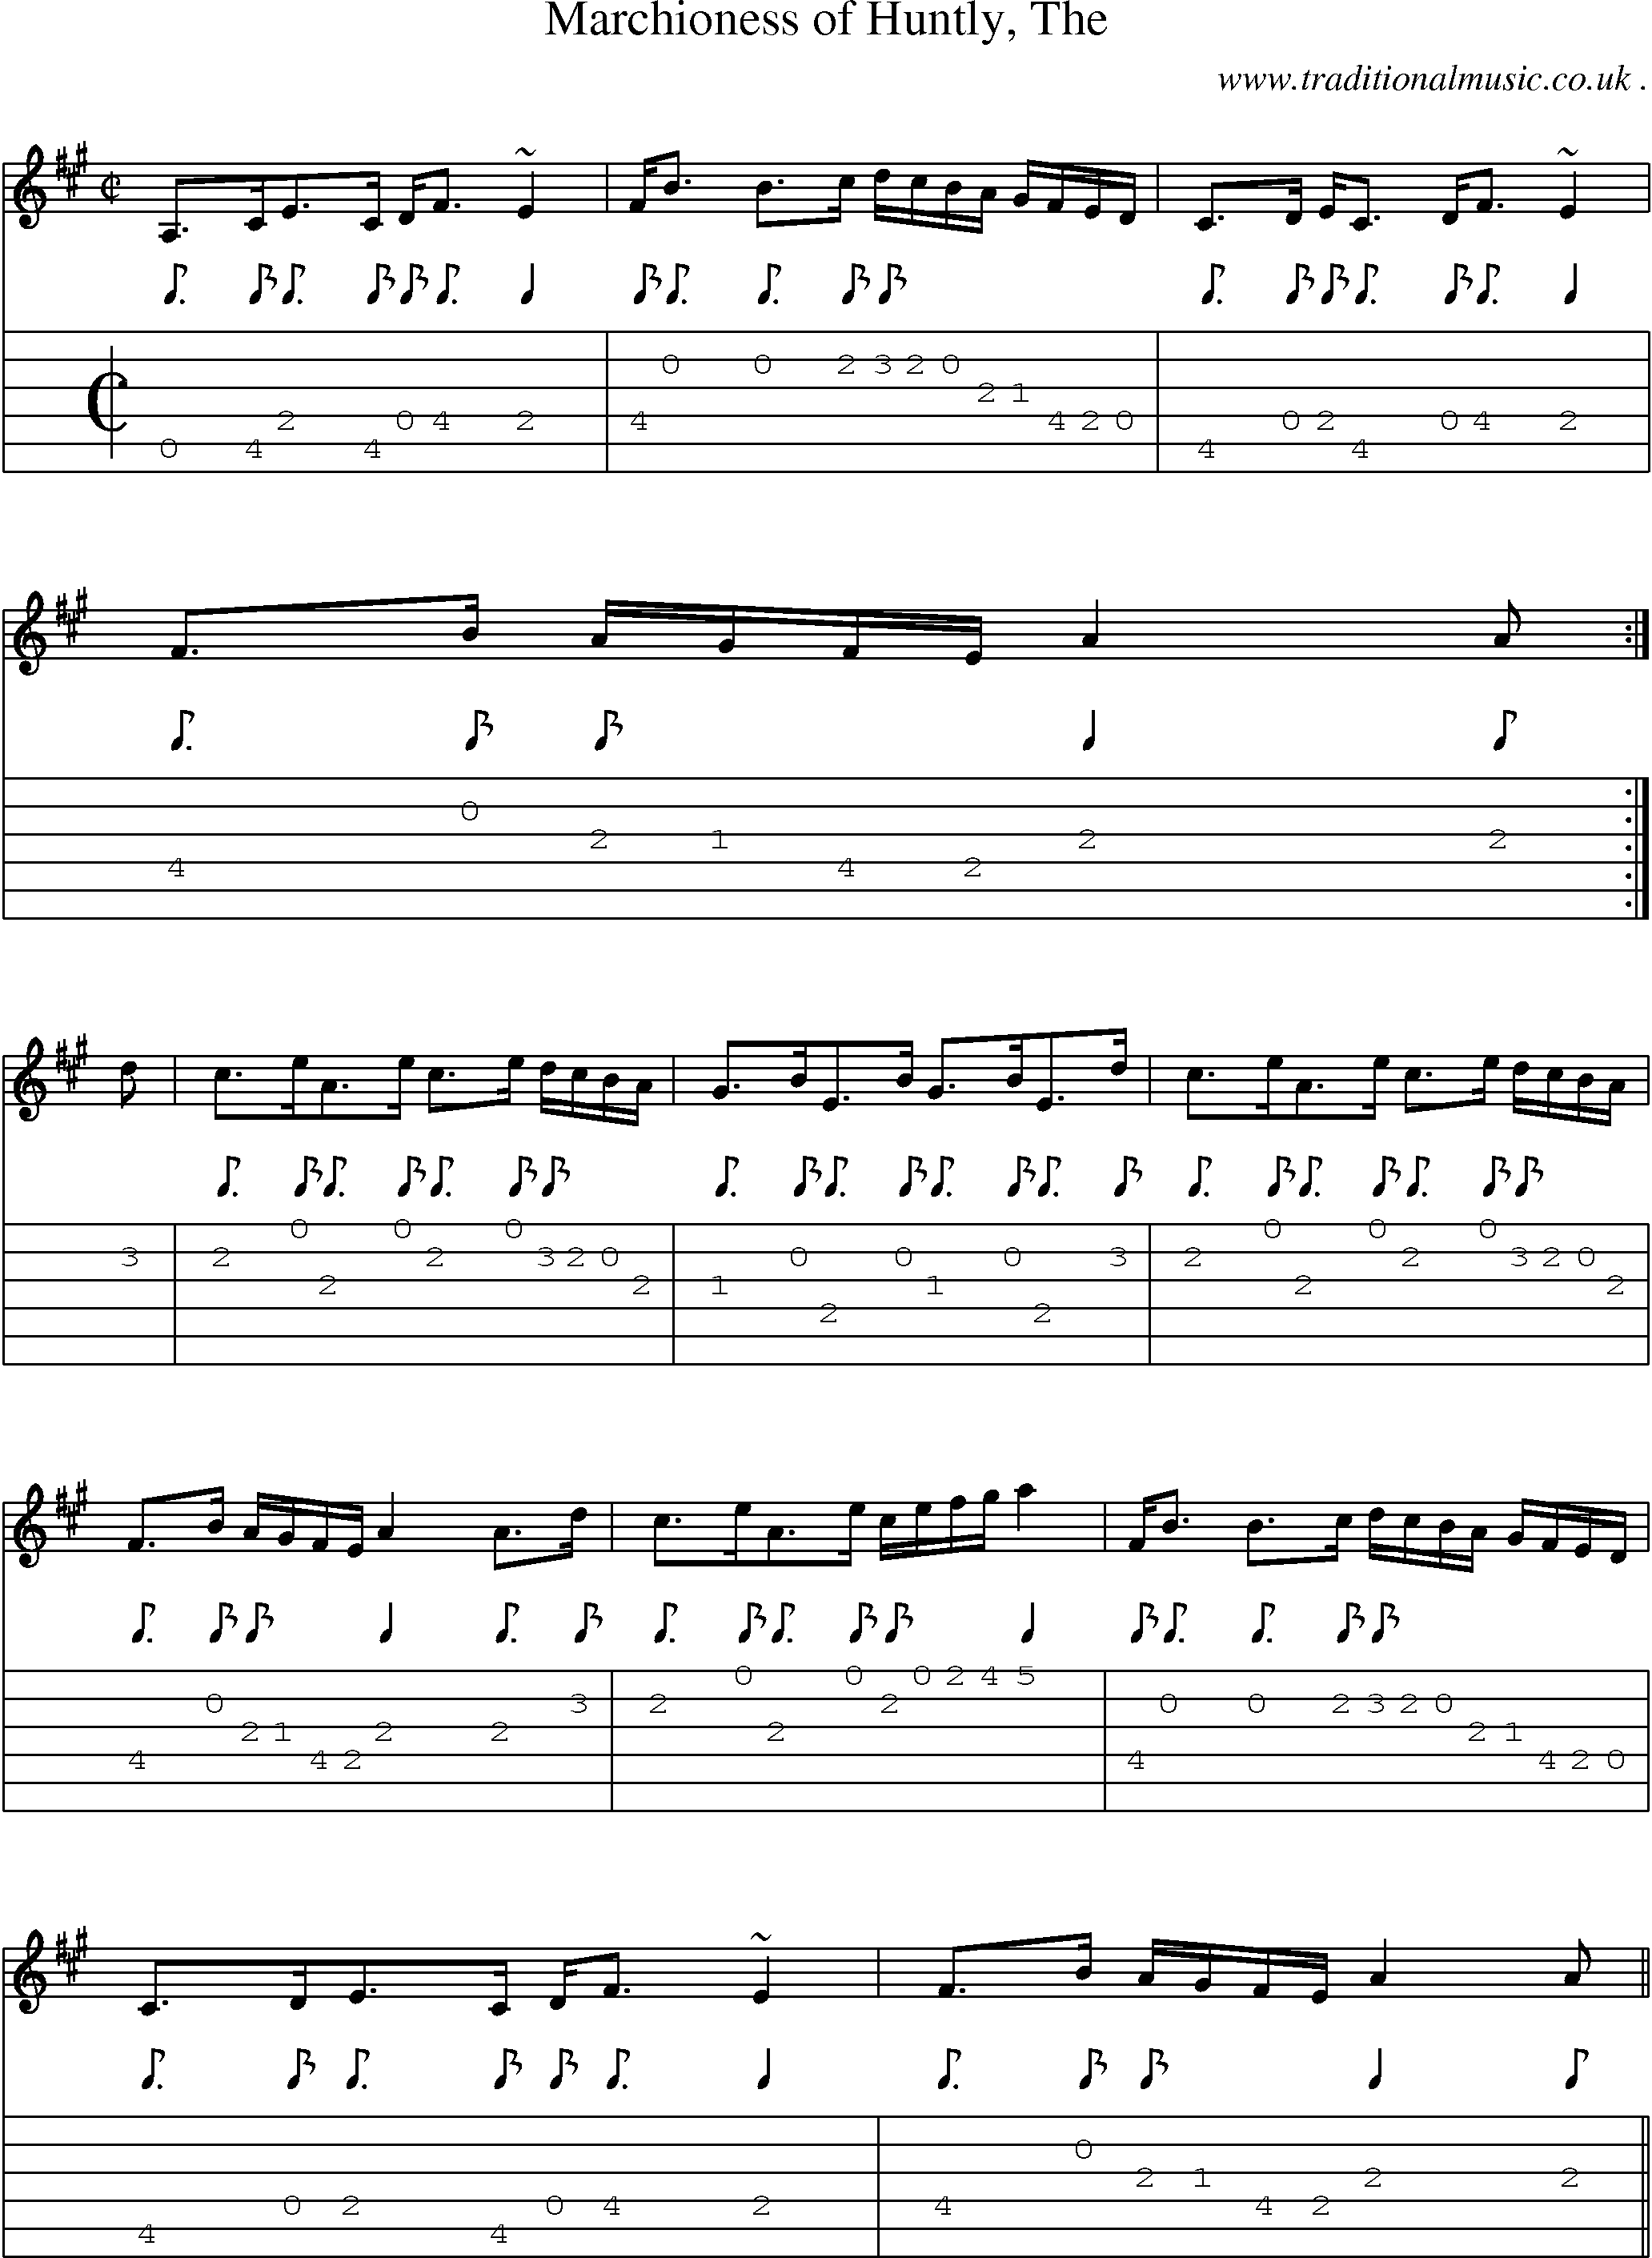 Sheet-music  score, Chords and Guitar Tabs for Marchioness Of Huntly The